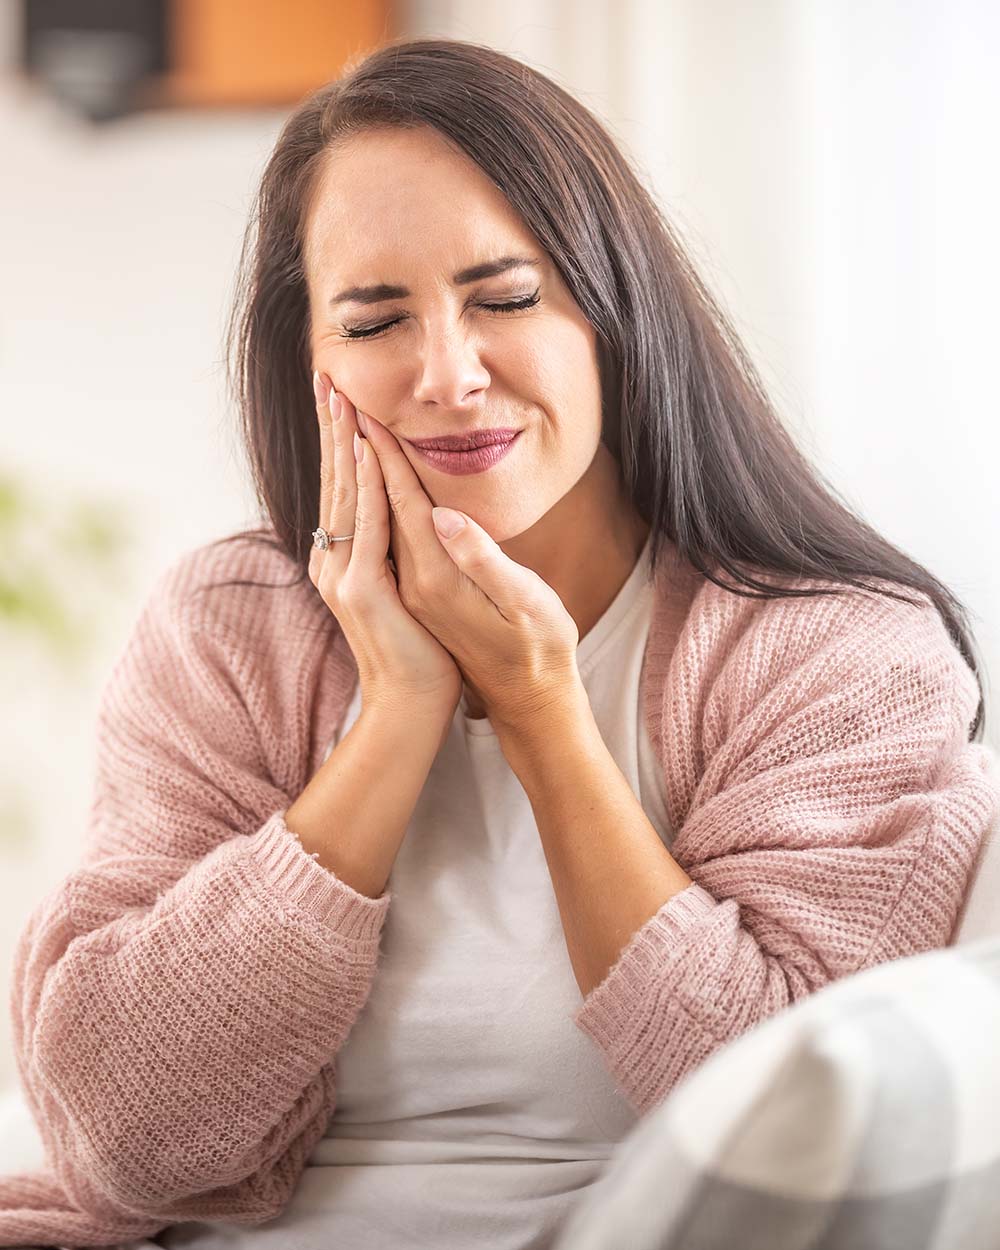 A woman dealing with tooth and jaw pain.